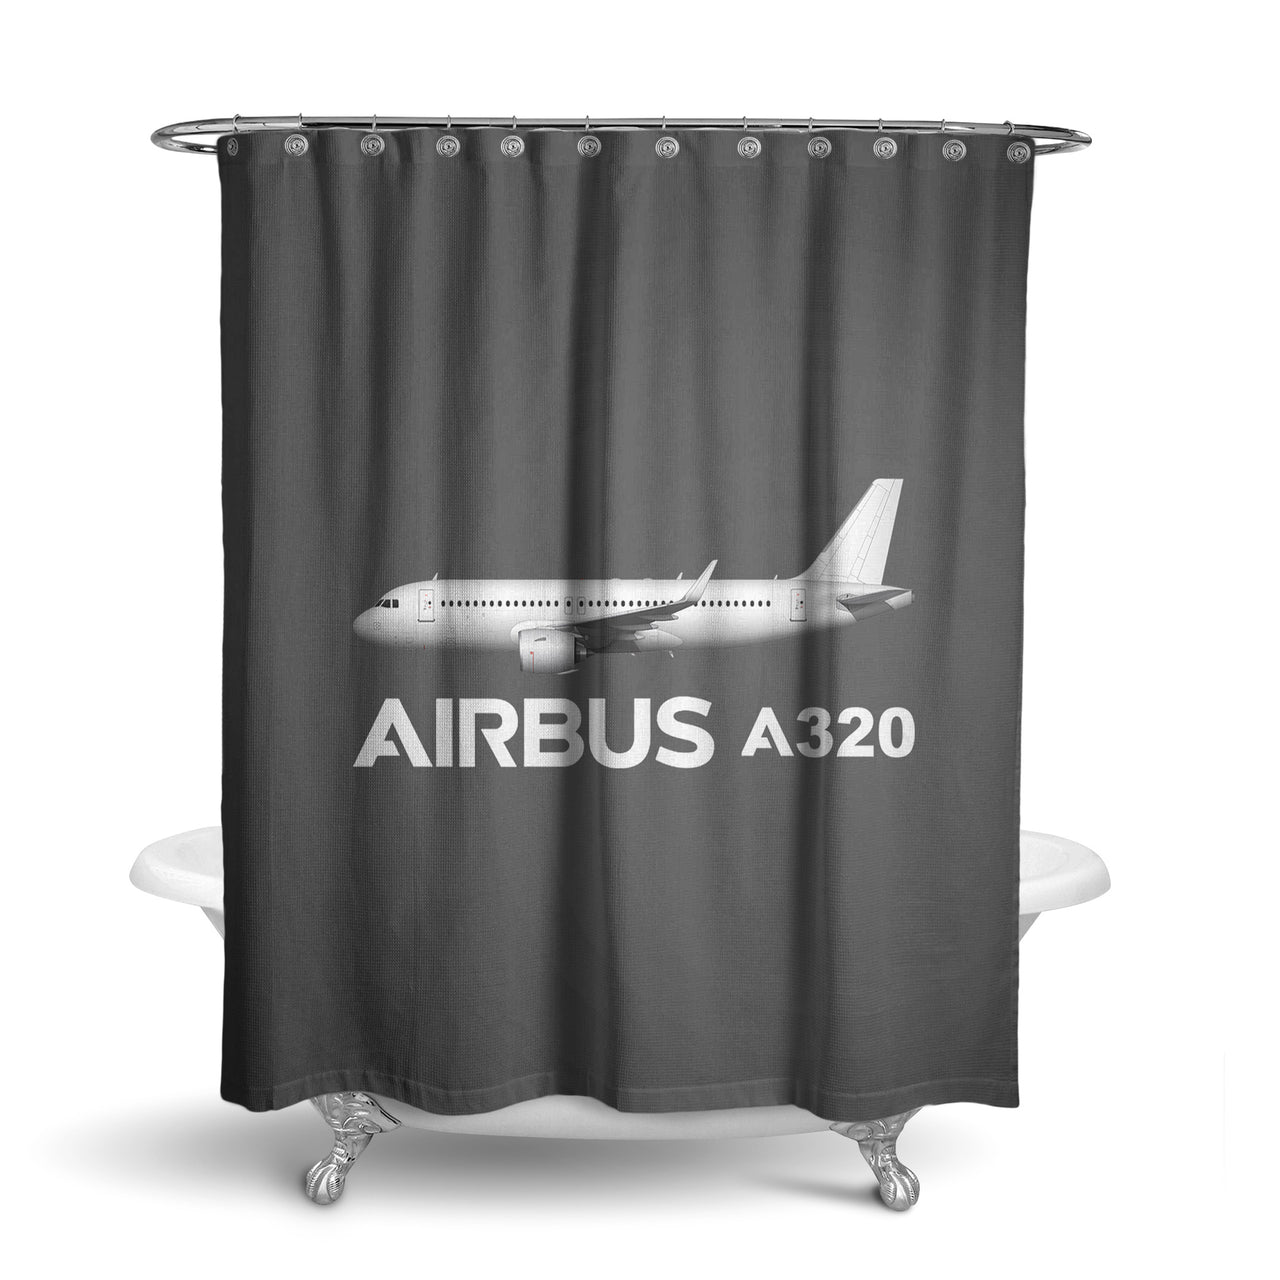 The Airbus A320 Designed Shower Curtains